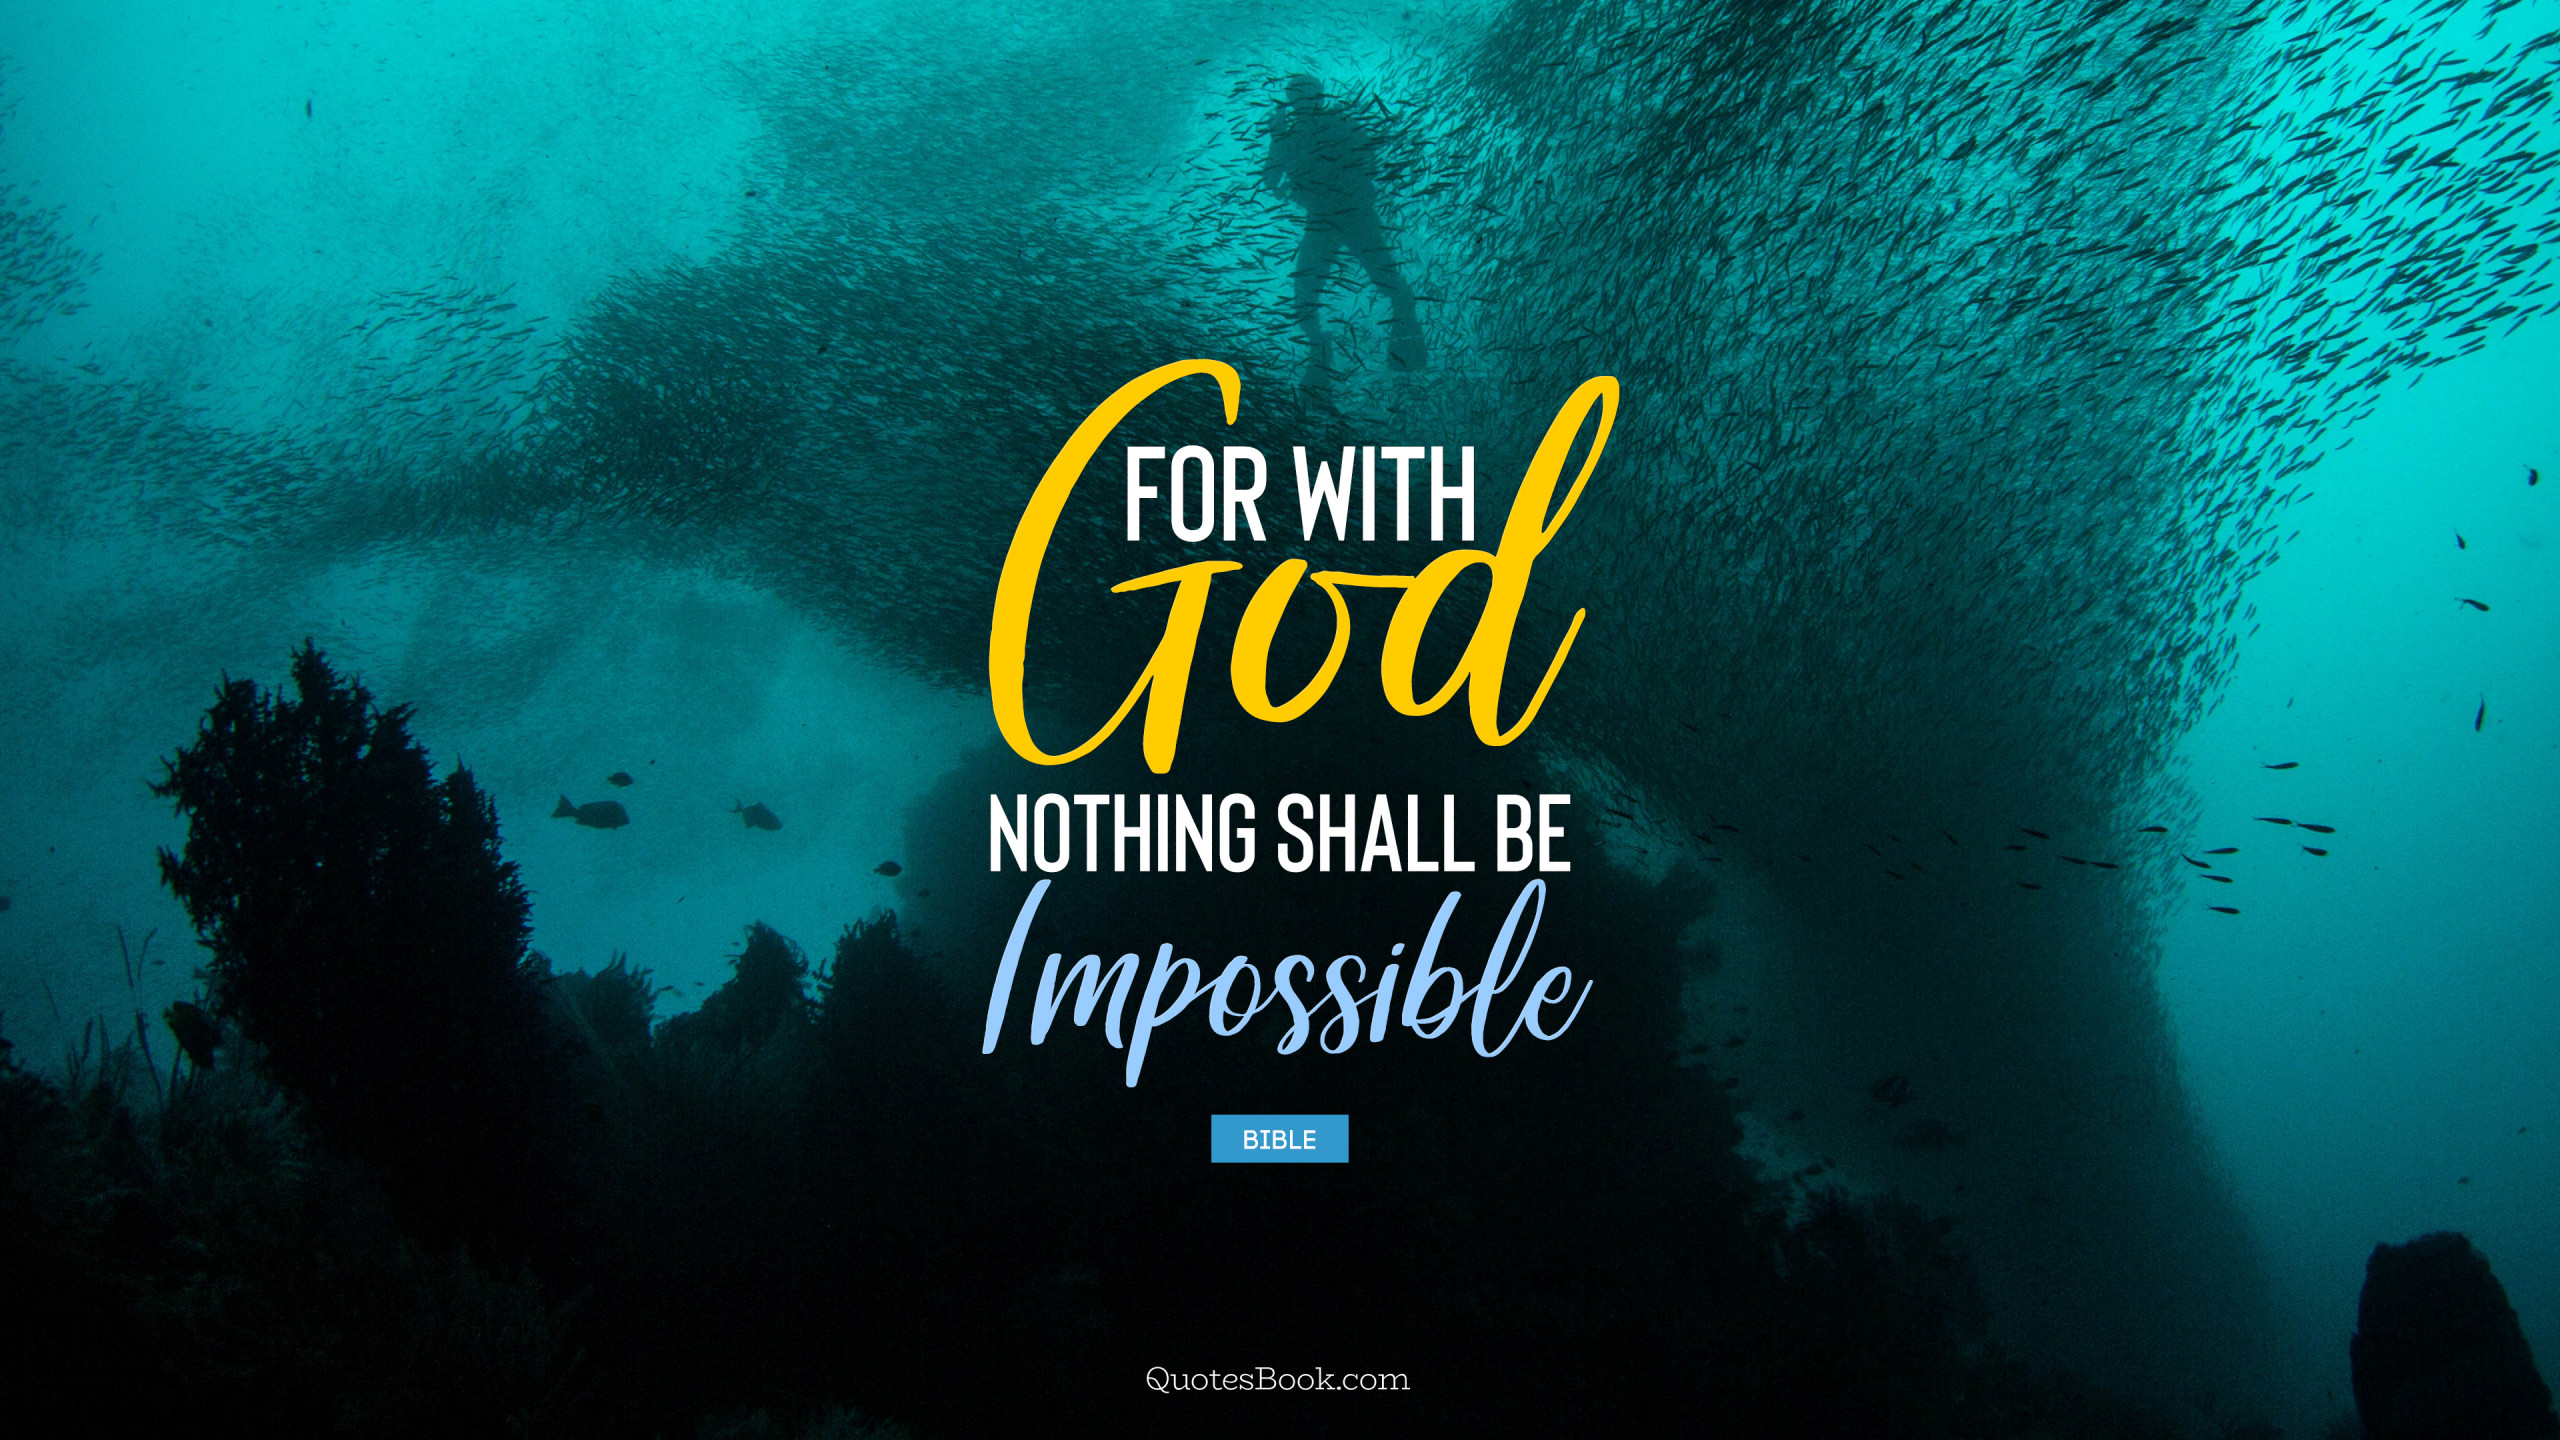 For with God nothing shall be impossible. - Quote by Bible - QuotesBook